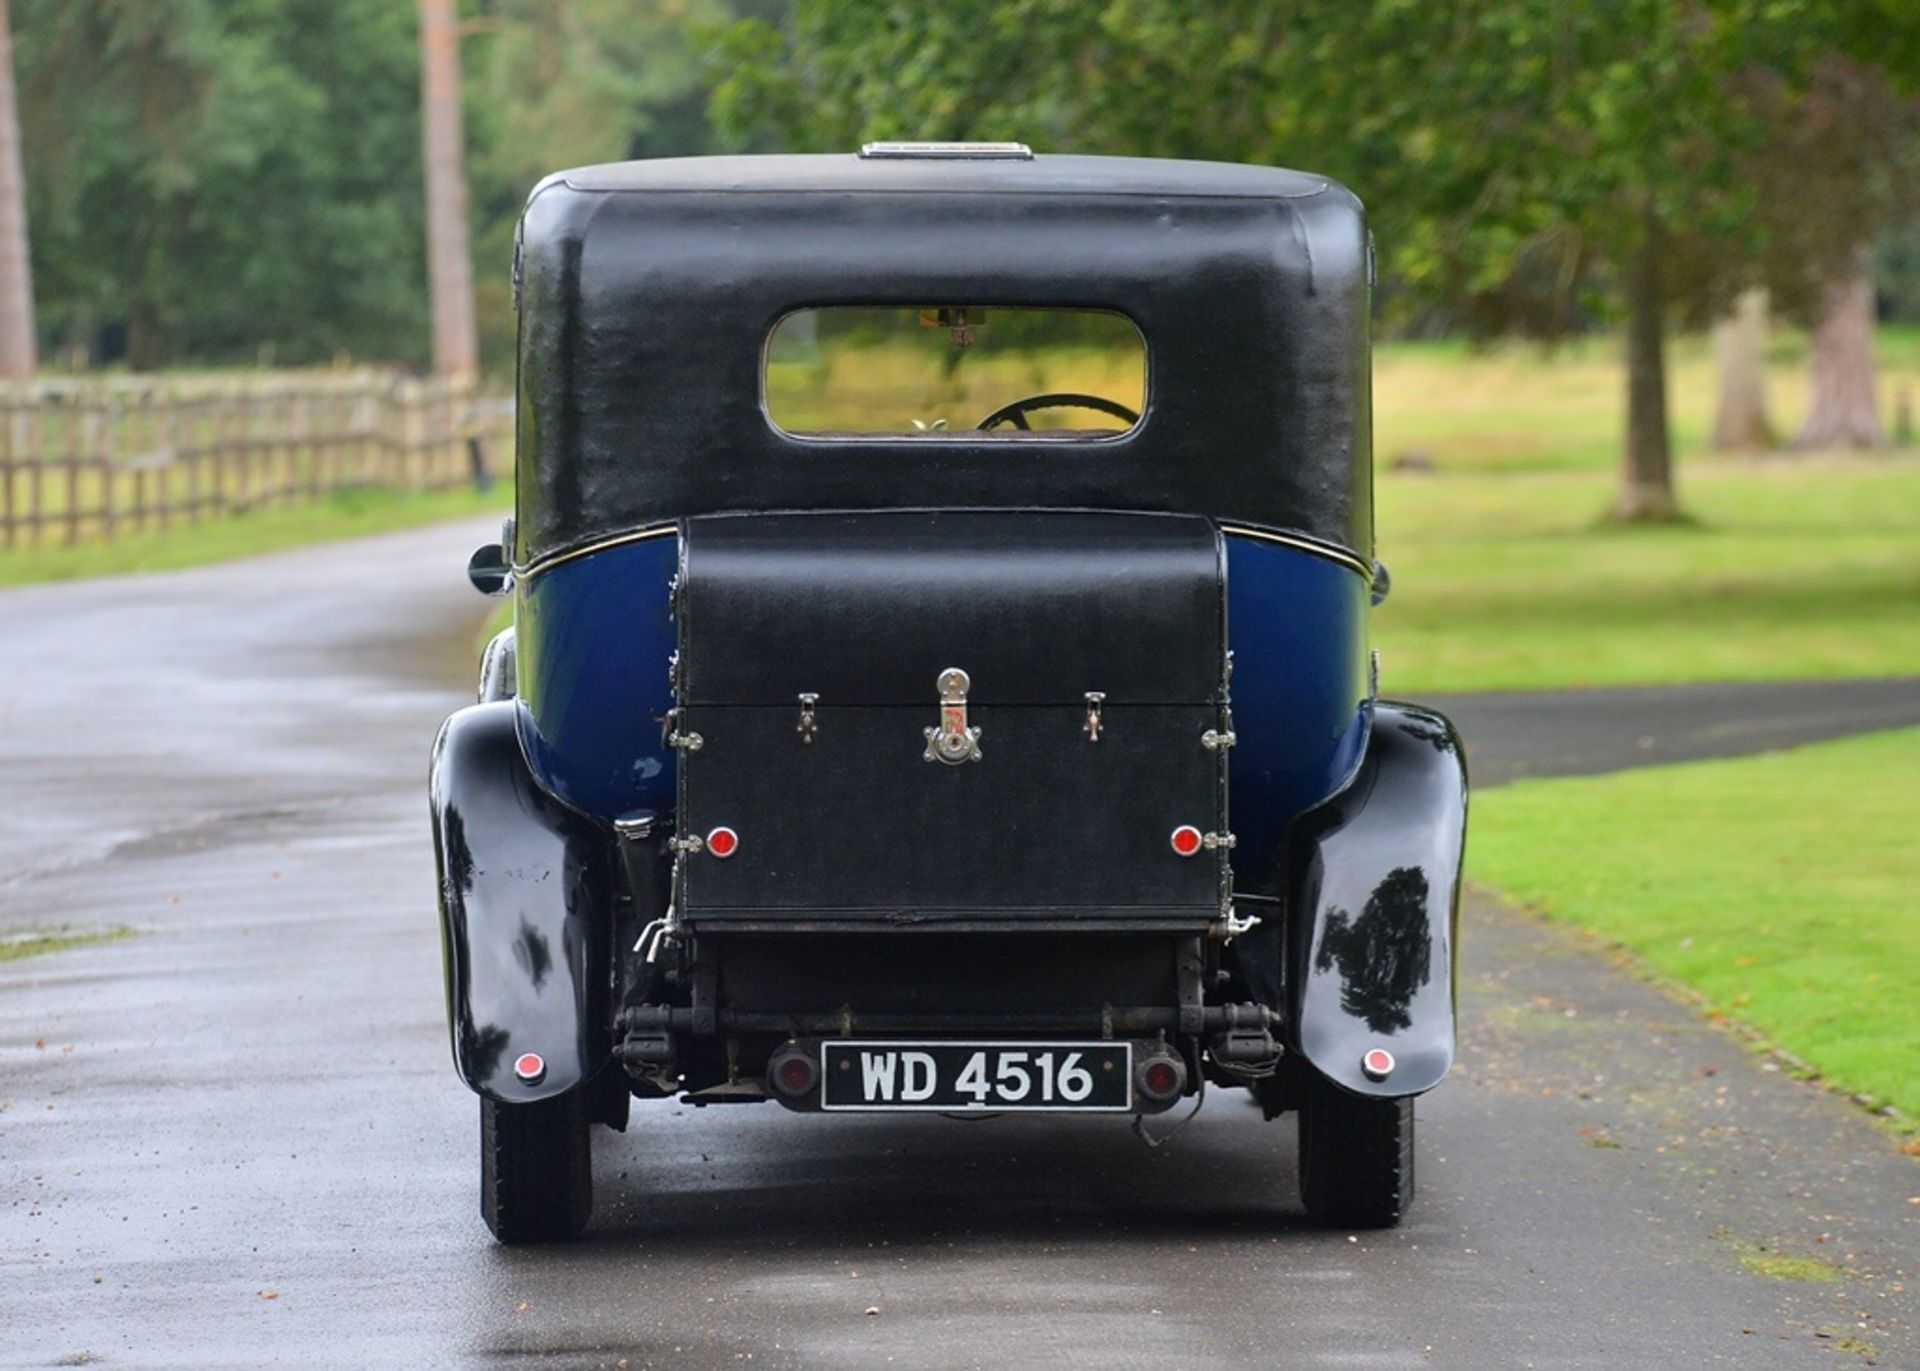 1932 Rolls-Royce 20/25 Limousine by Crosbie & Dunn - Image 15 of 16